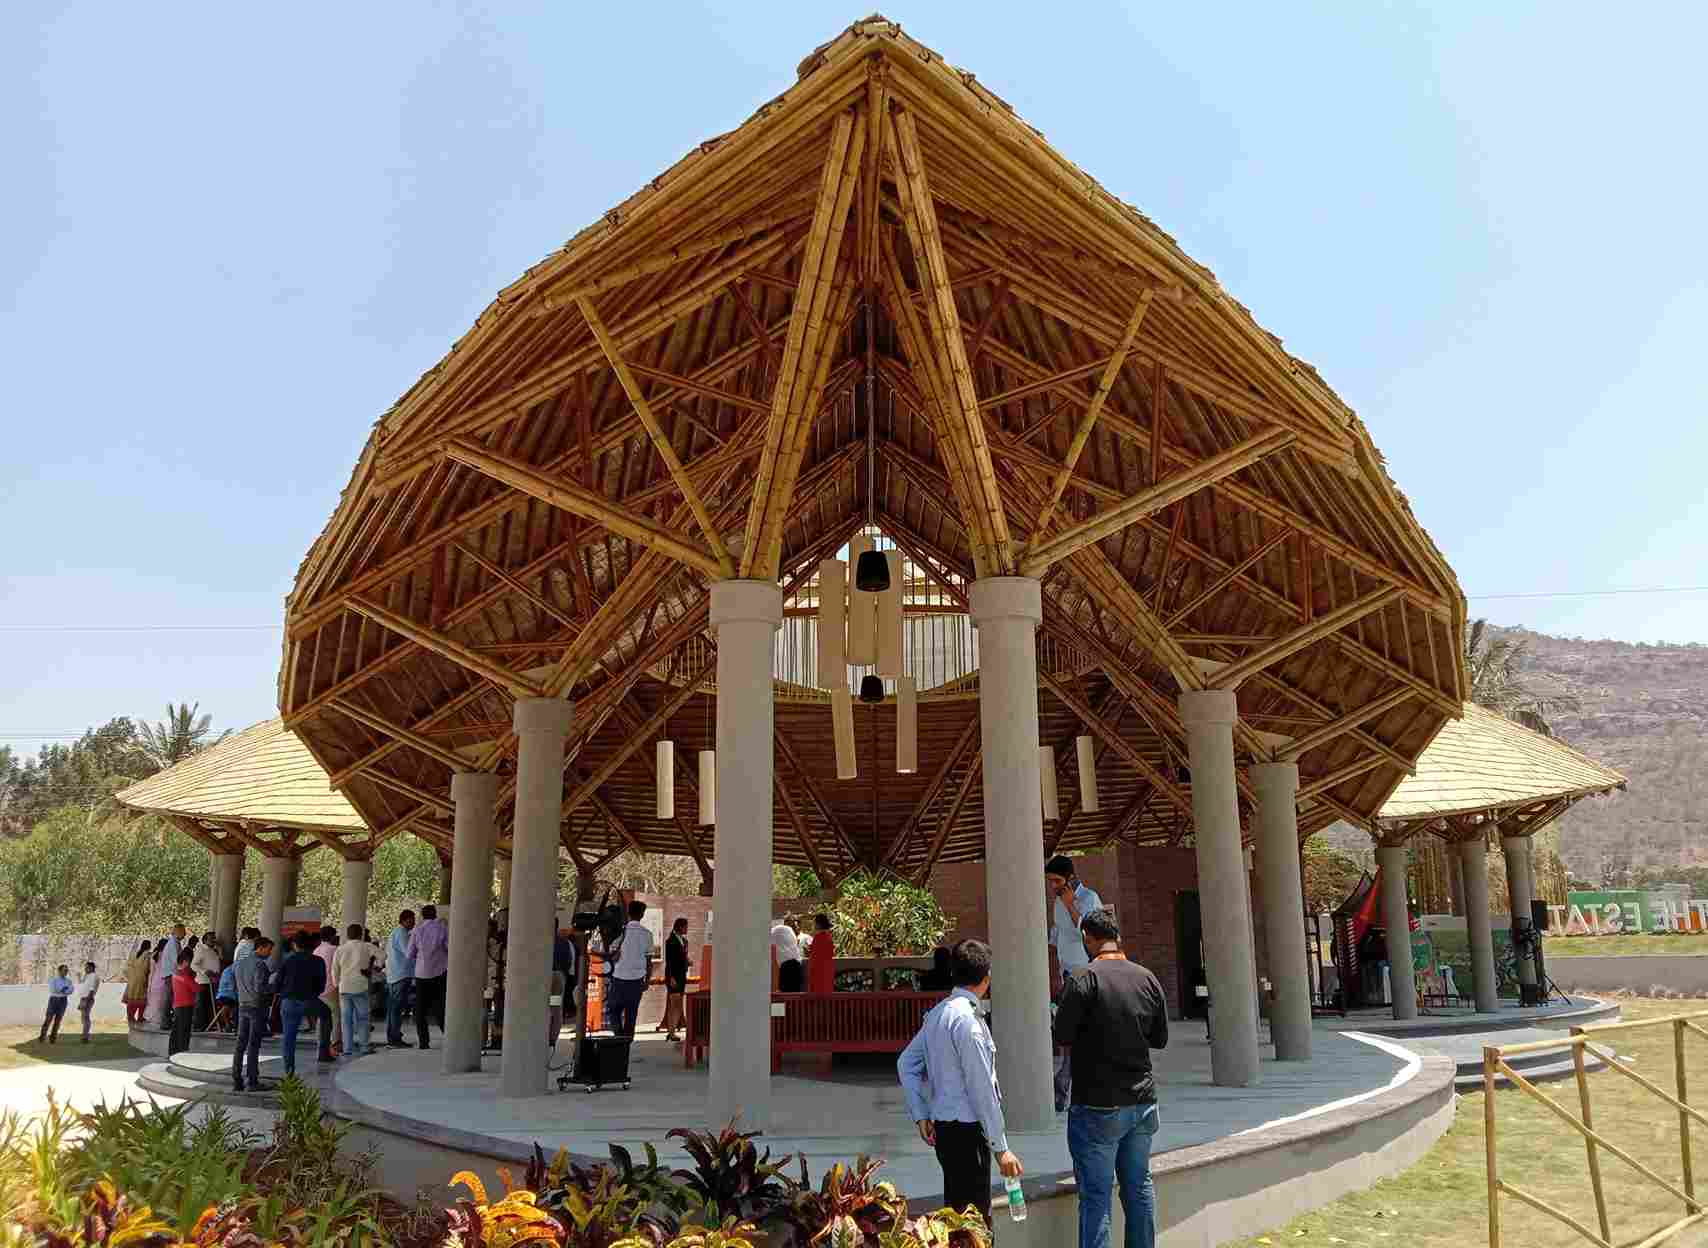 Sanjeev Karpe's bamboo constructions involve farmers growing the crop